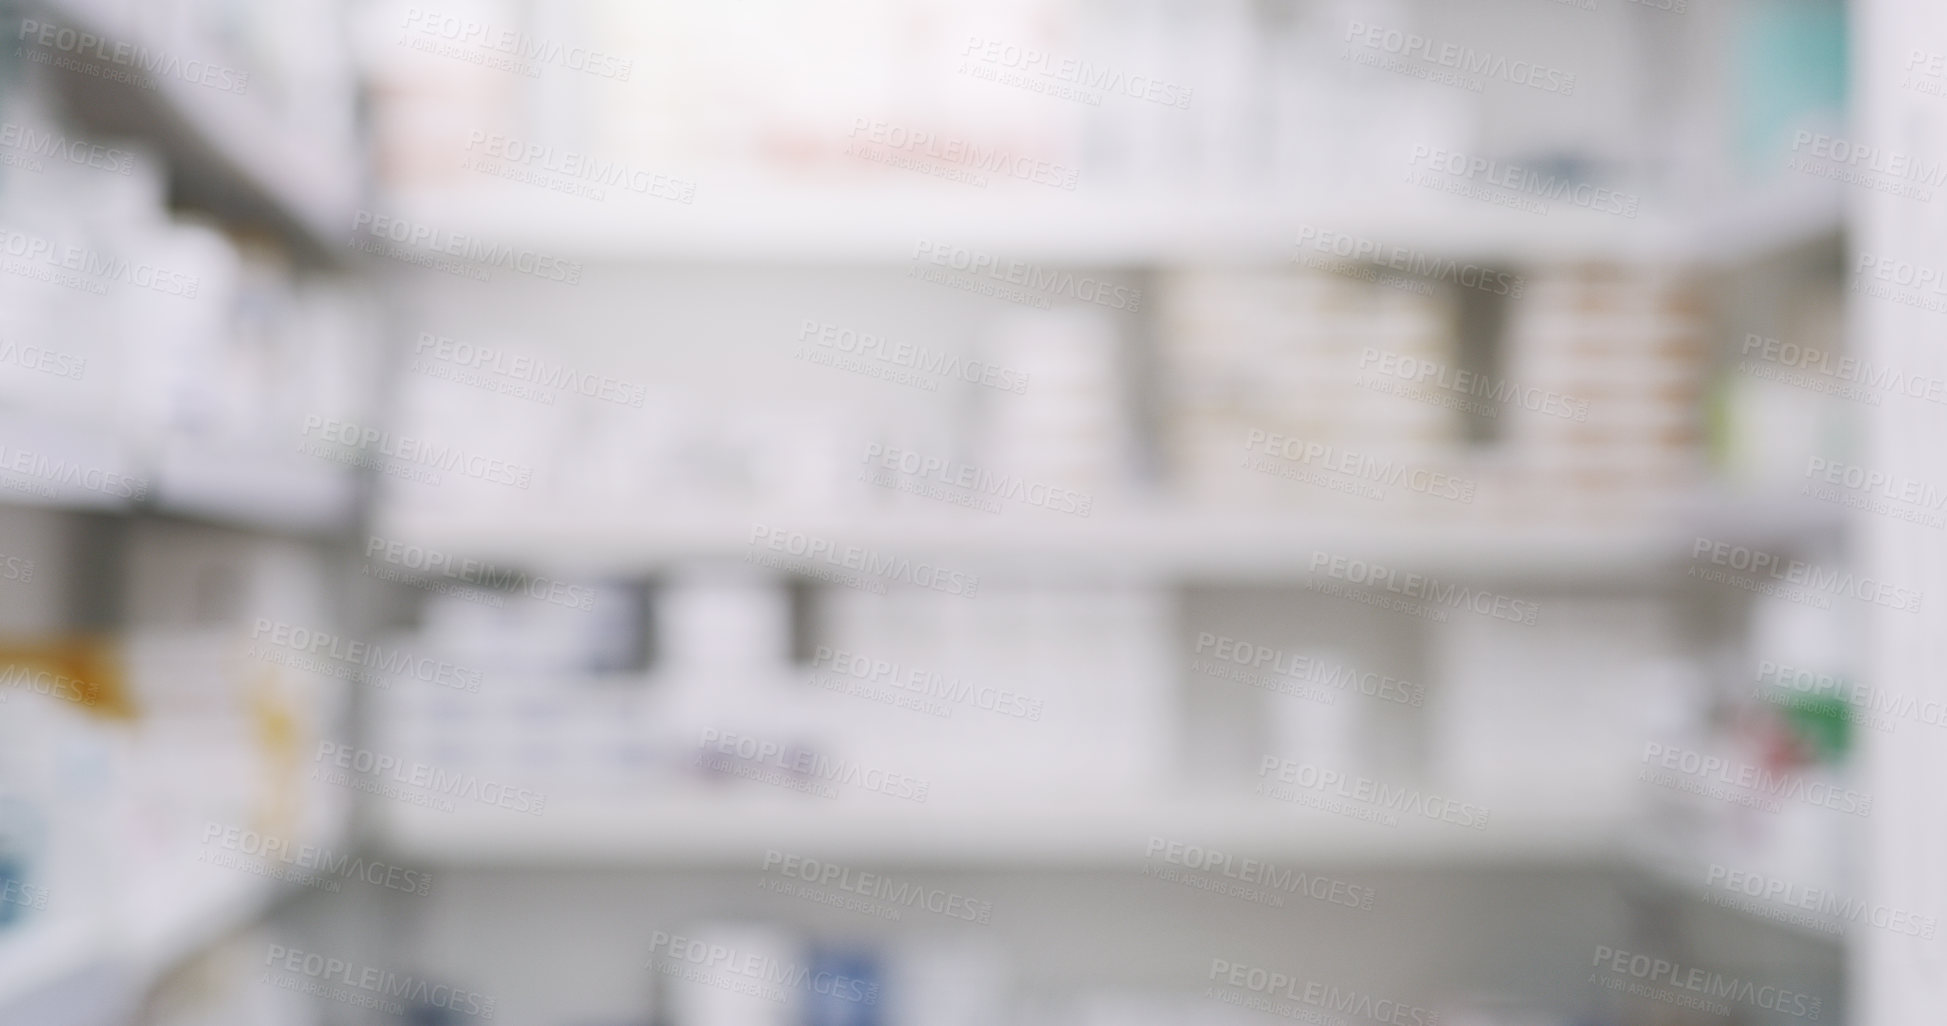 Buy stock photo Shot of shelves stocked with various medicinal products in a pharmacy